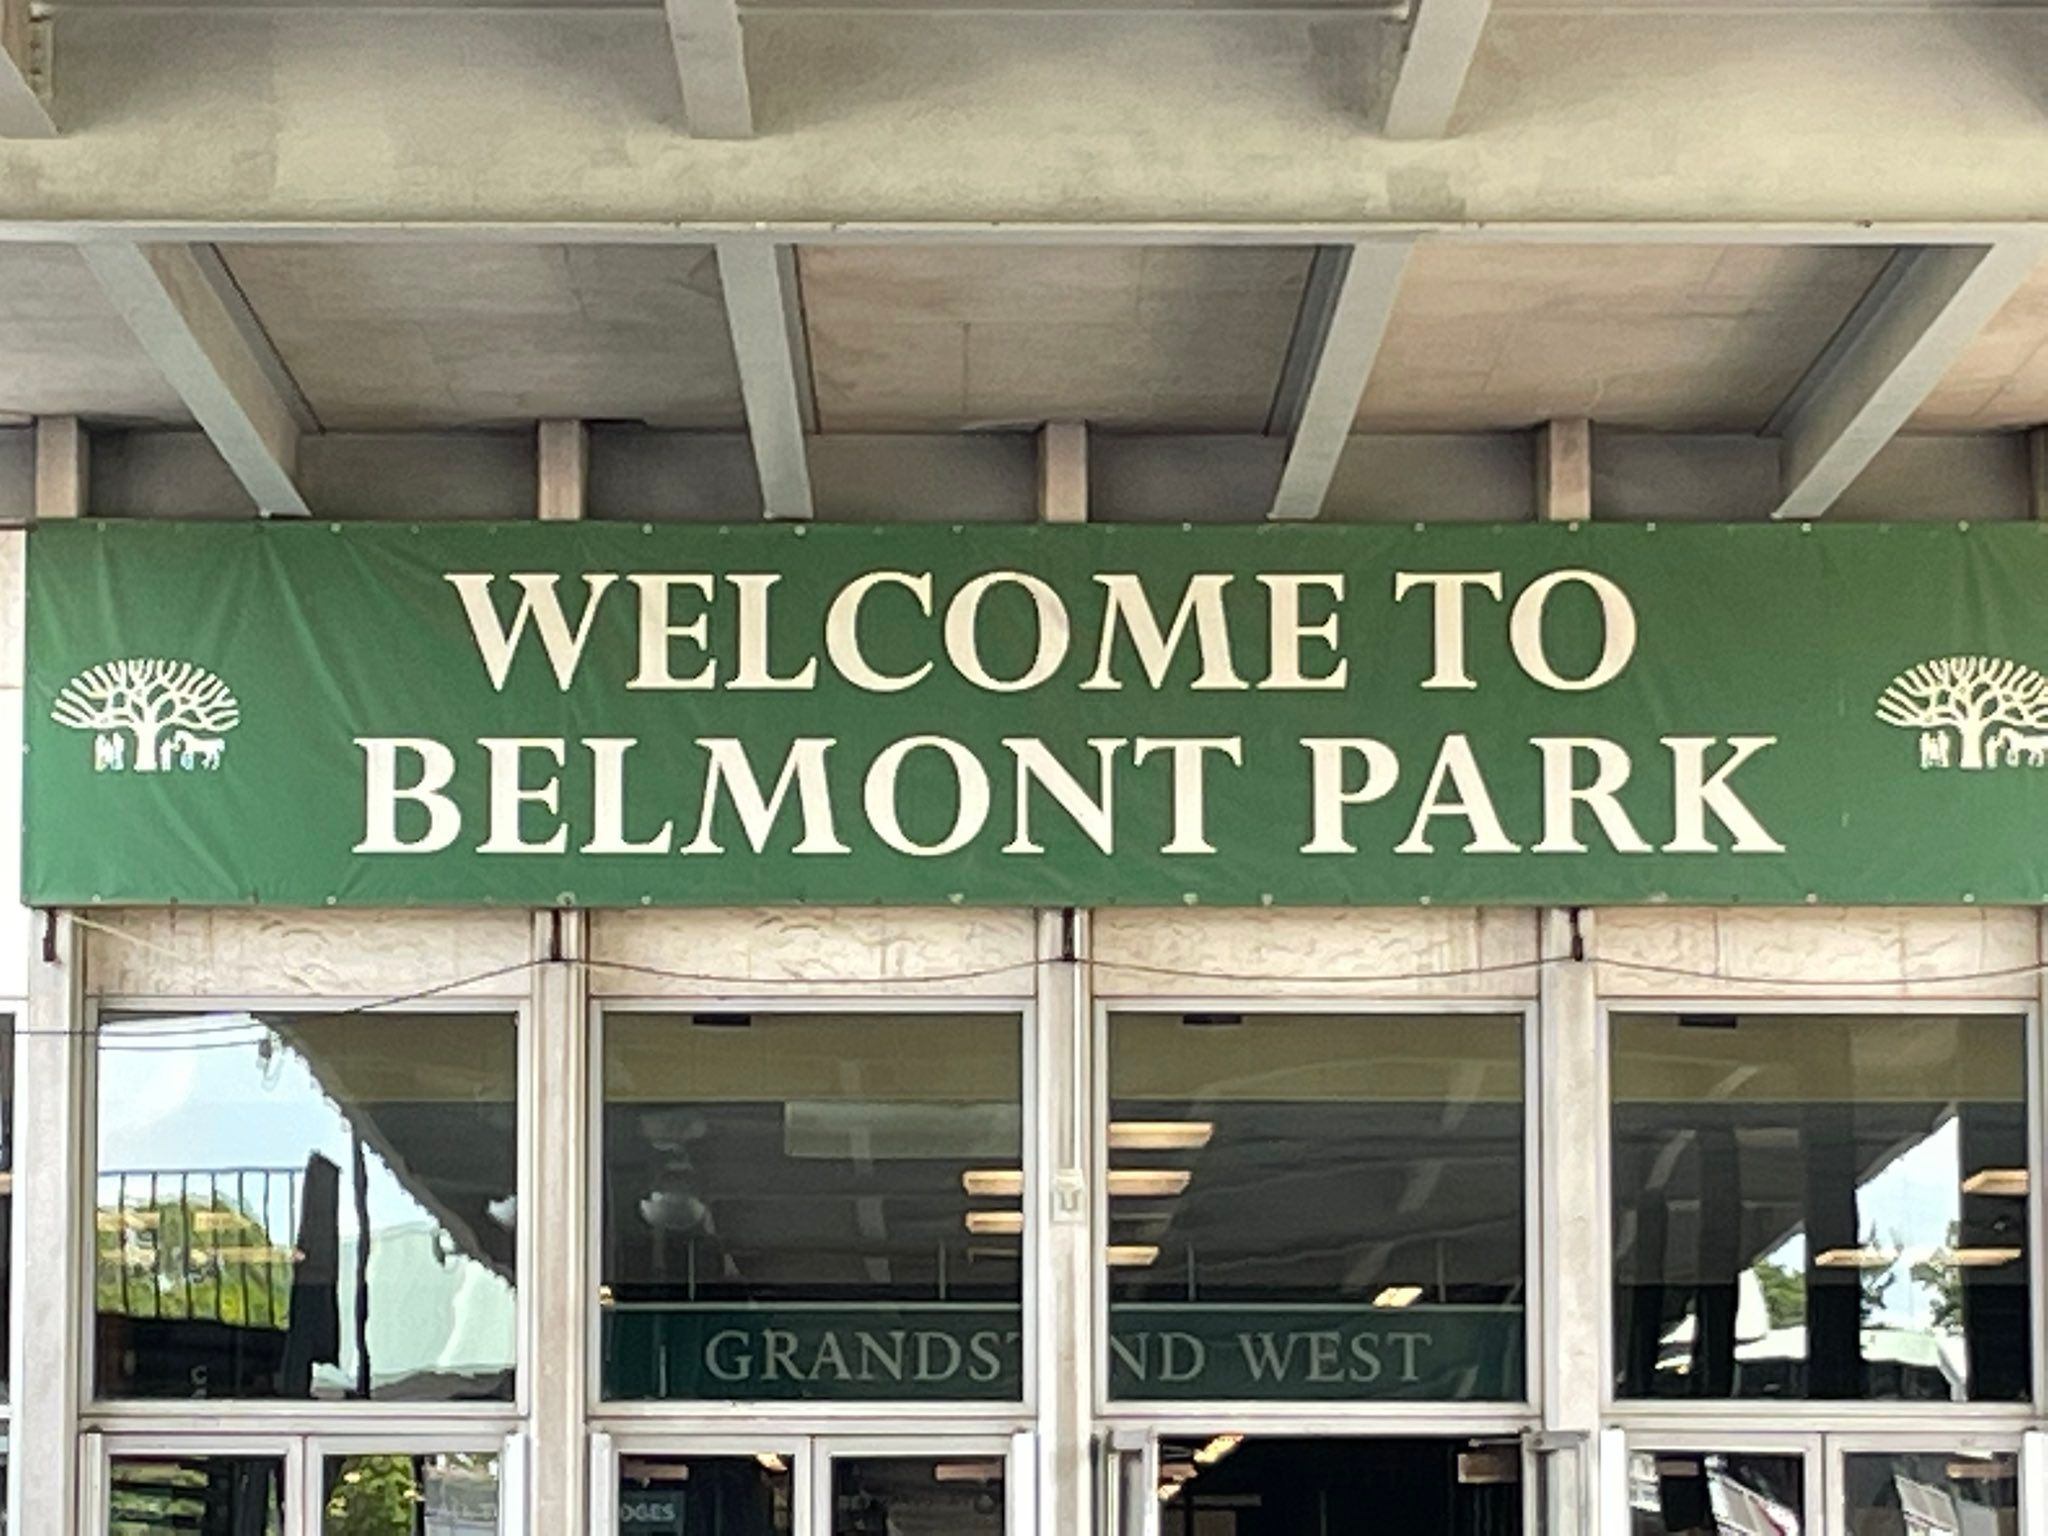 Belmont Stakes 2022: All you need to know about the Belmont Park track